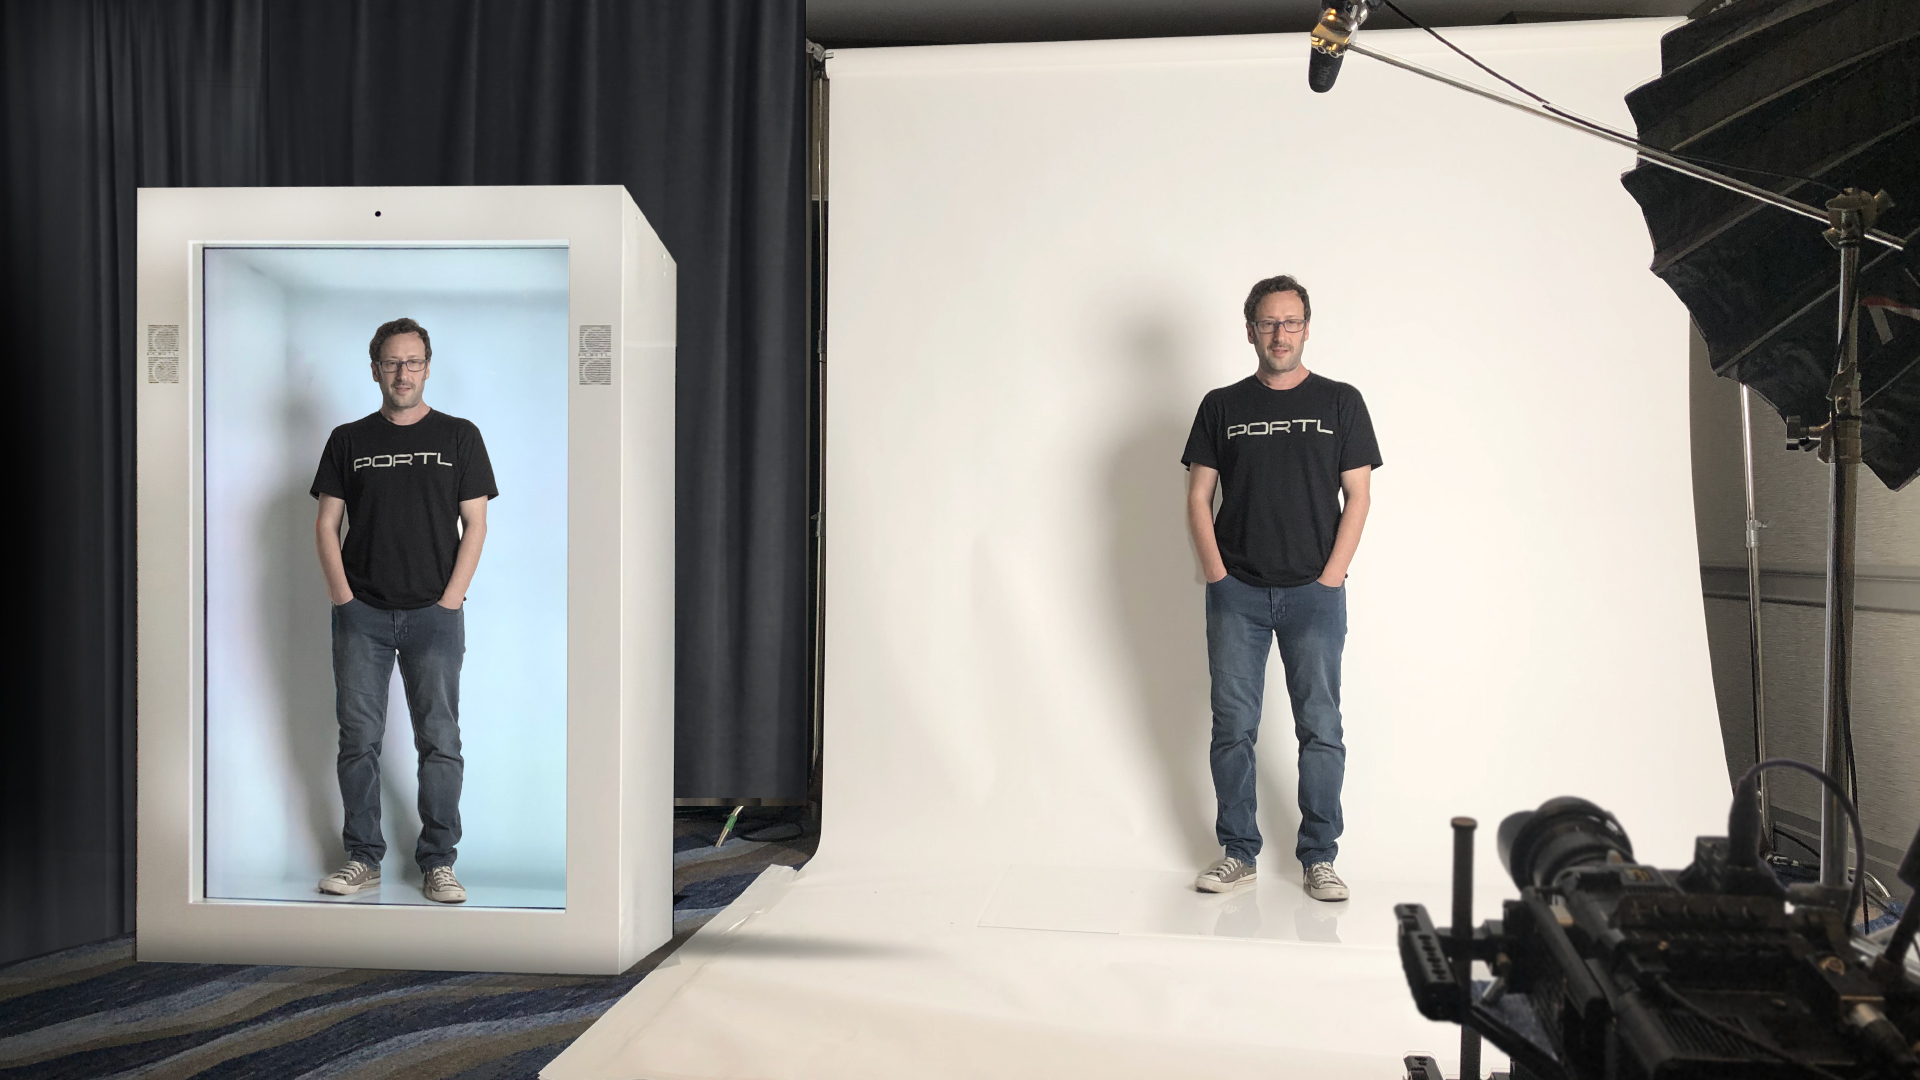 PORTL Inc, founder David Nussbaum demonstrates the Epic PORTL hologram device, the world's first human-sized, single-passenger holoportation machine. The Tim Draper-backed startup's slogan is, "If you can't BE there, BEAM there!"